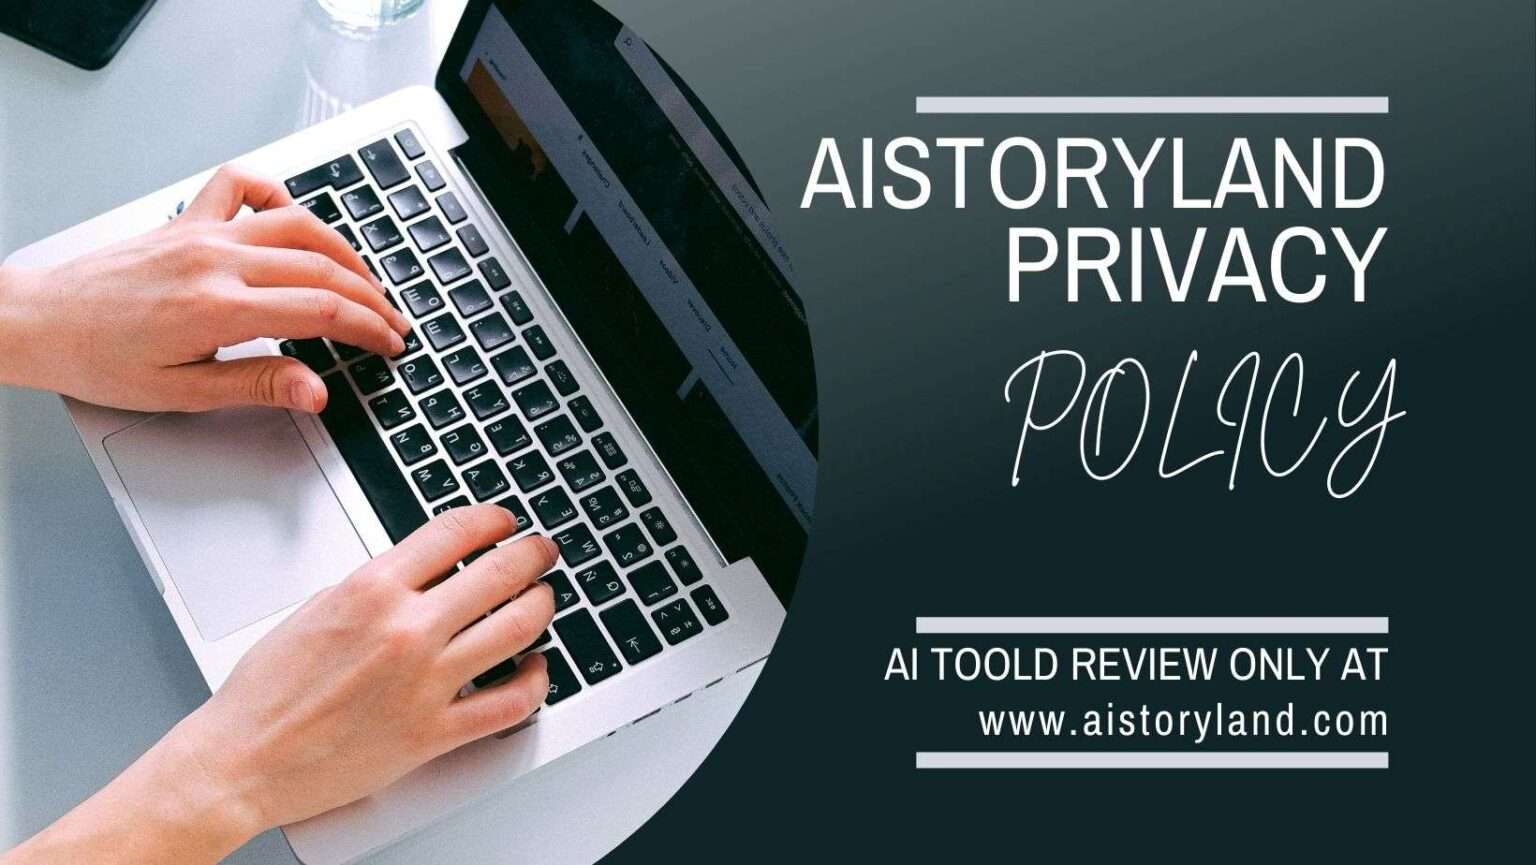 aistoryland privacy policy